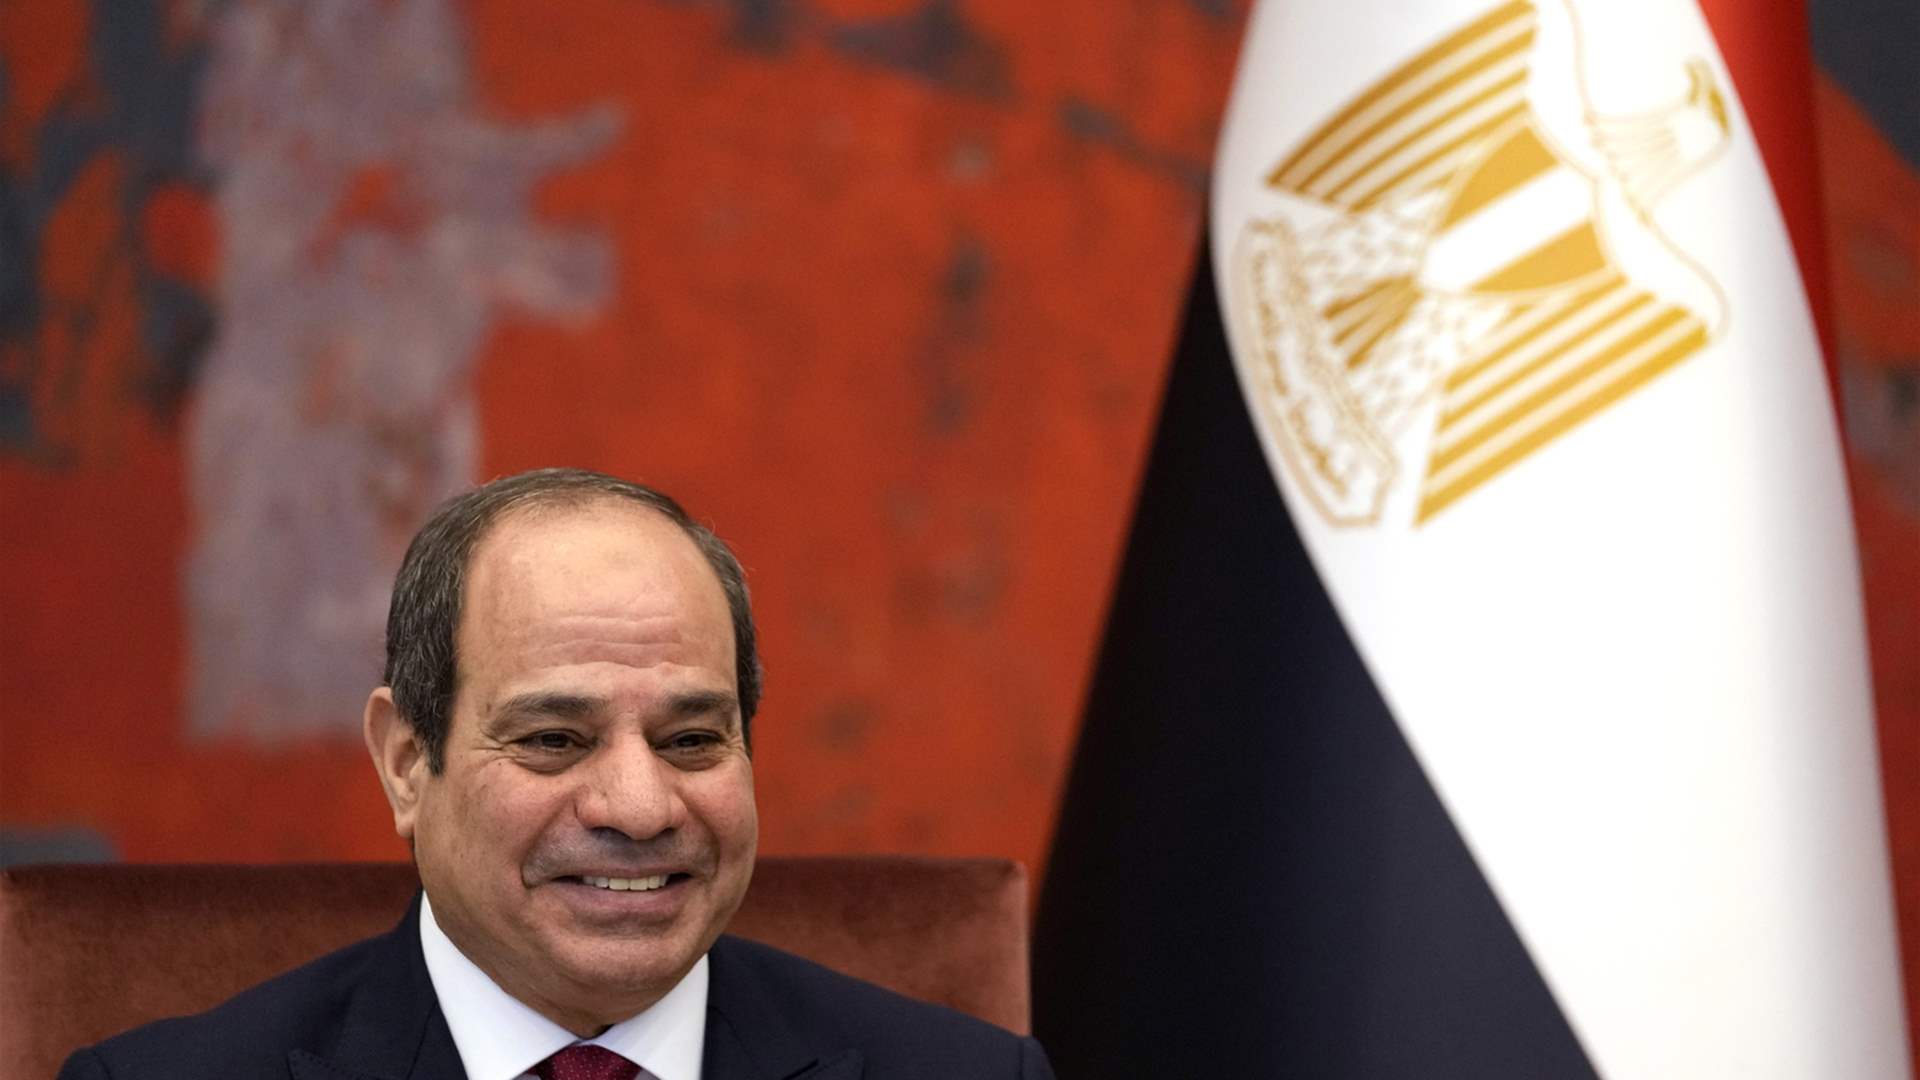 Egypt’s El-Sisi calls for ‘recognition of the Palestinian state’